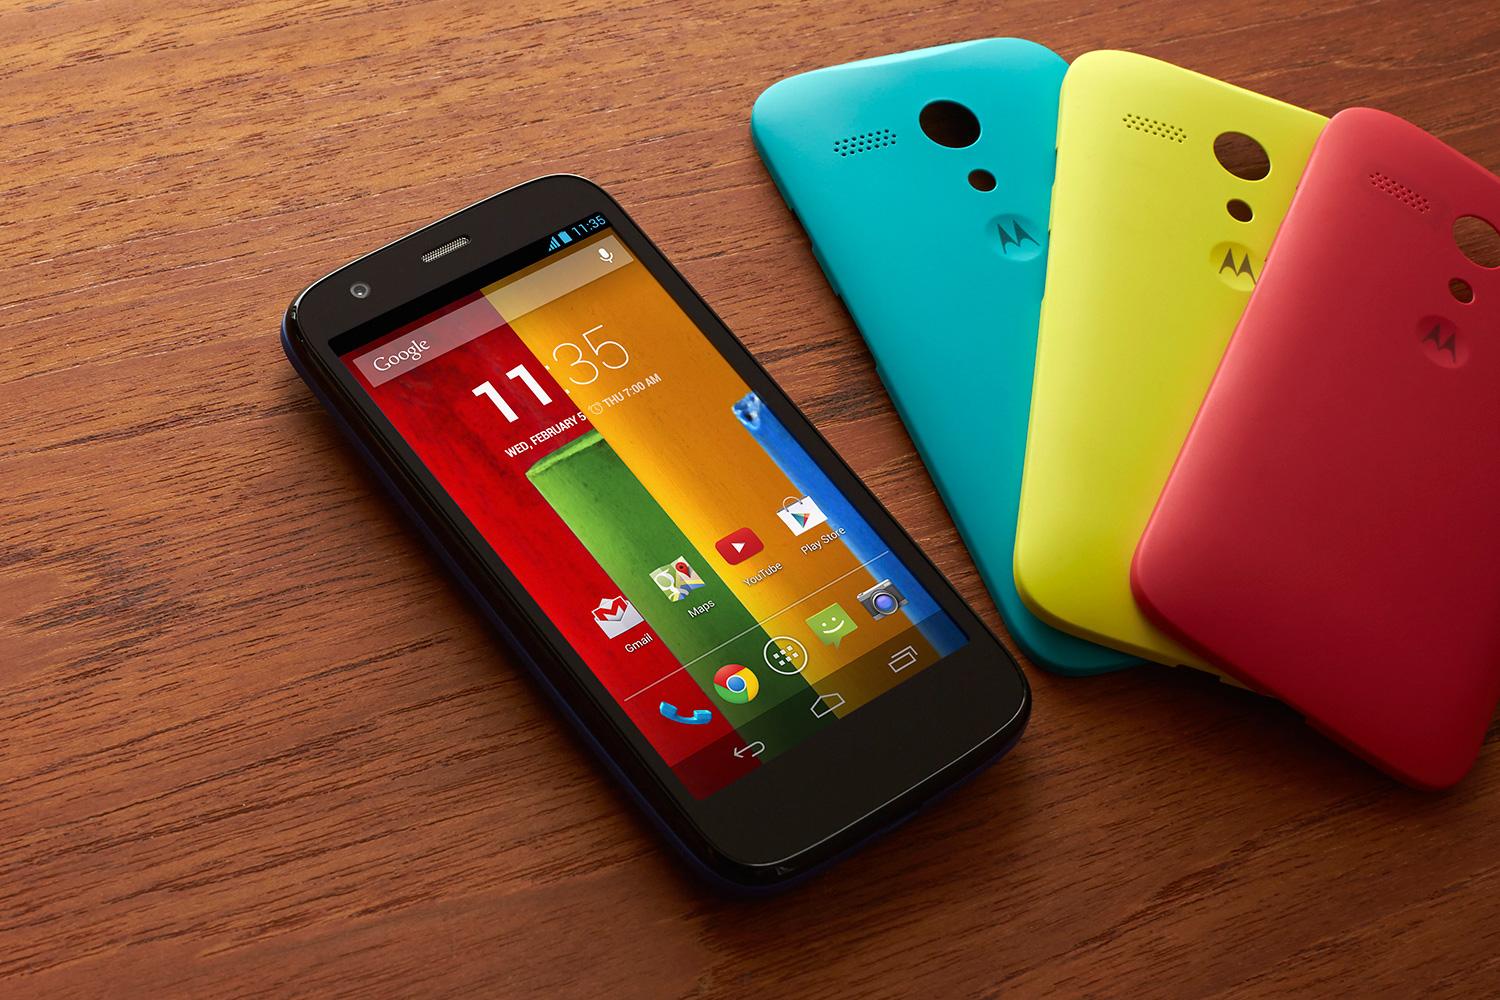 Motog G Mon Problems Users Have And